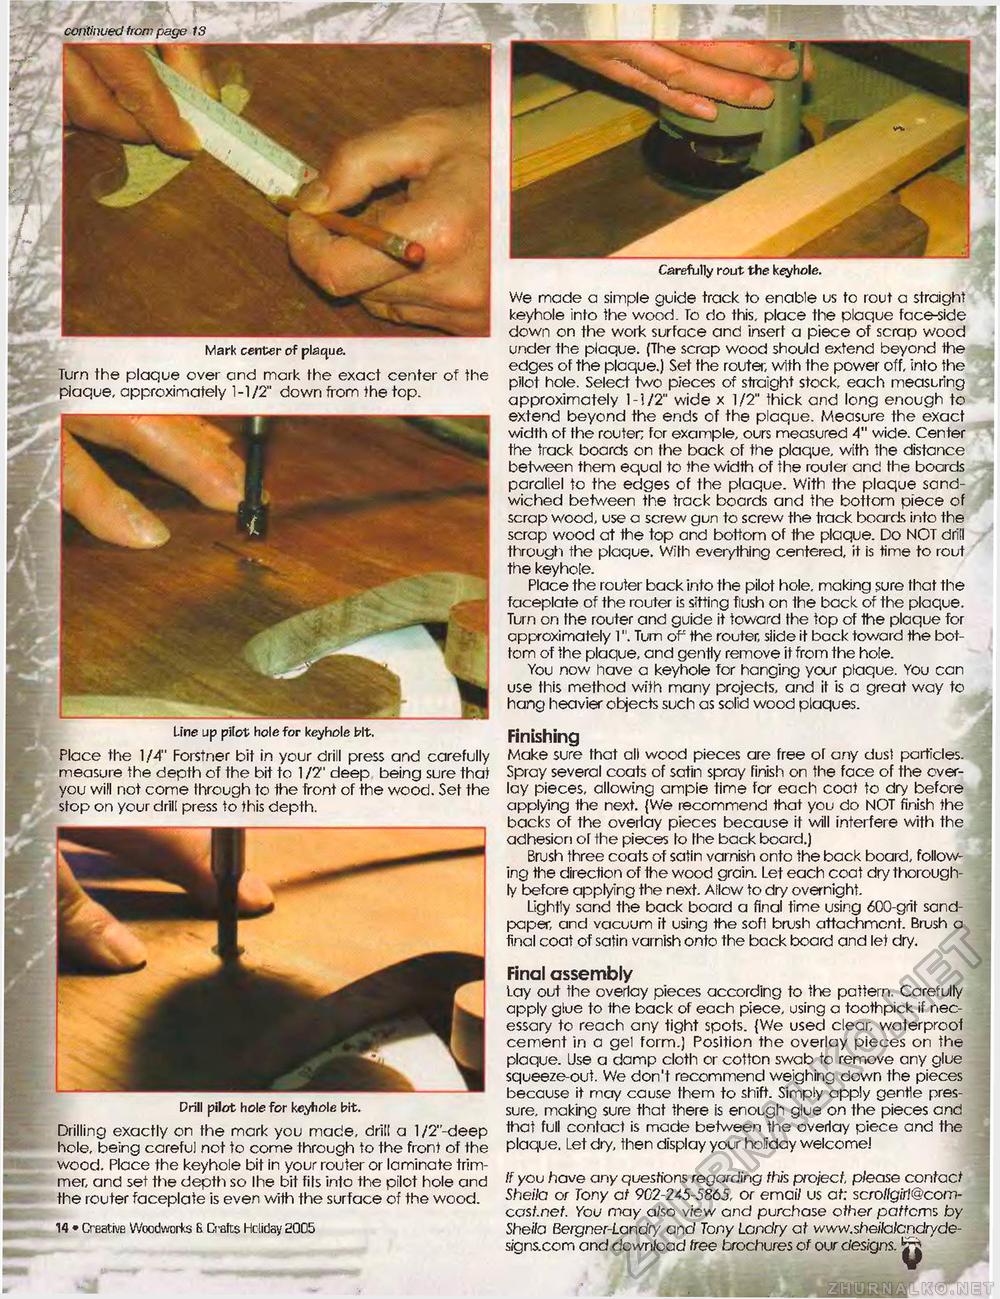 Creative Woodworks  & crafts-111-2005-Holiday,  14